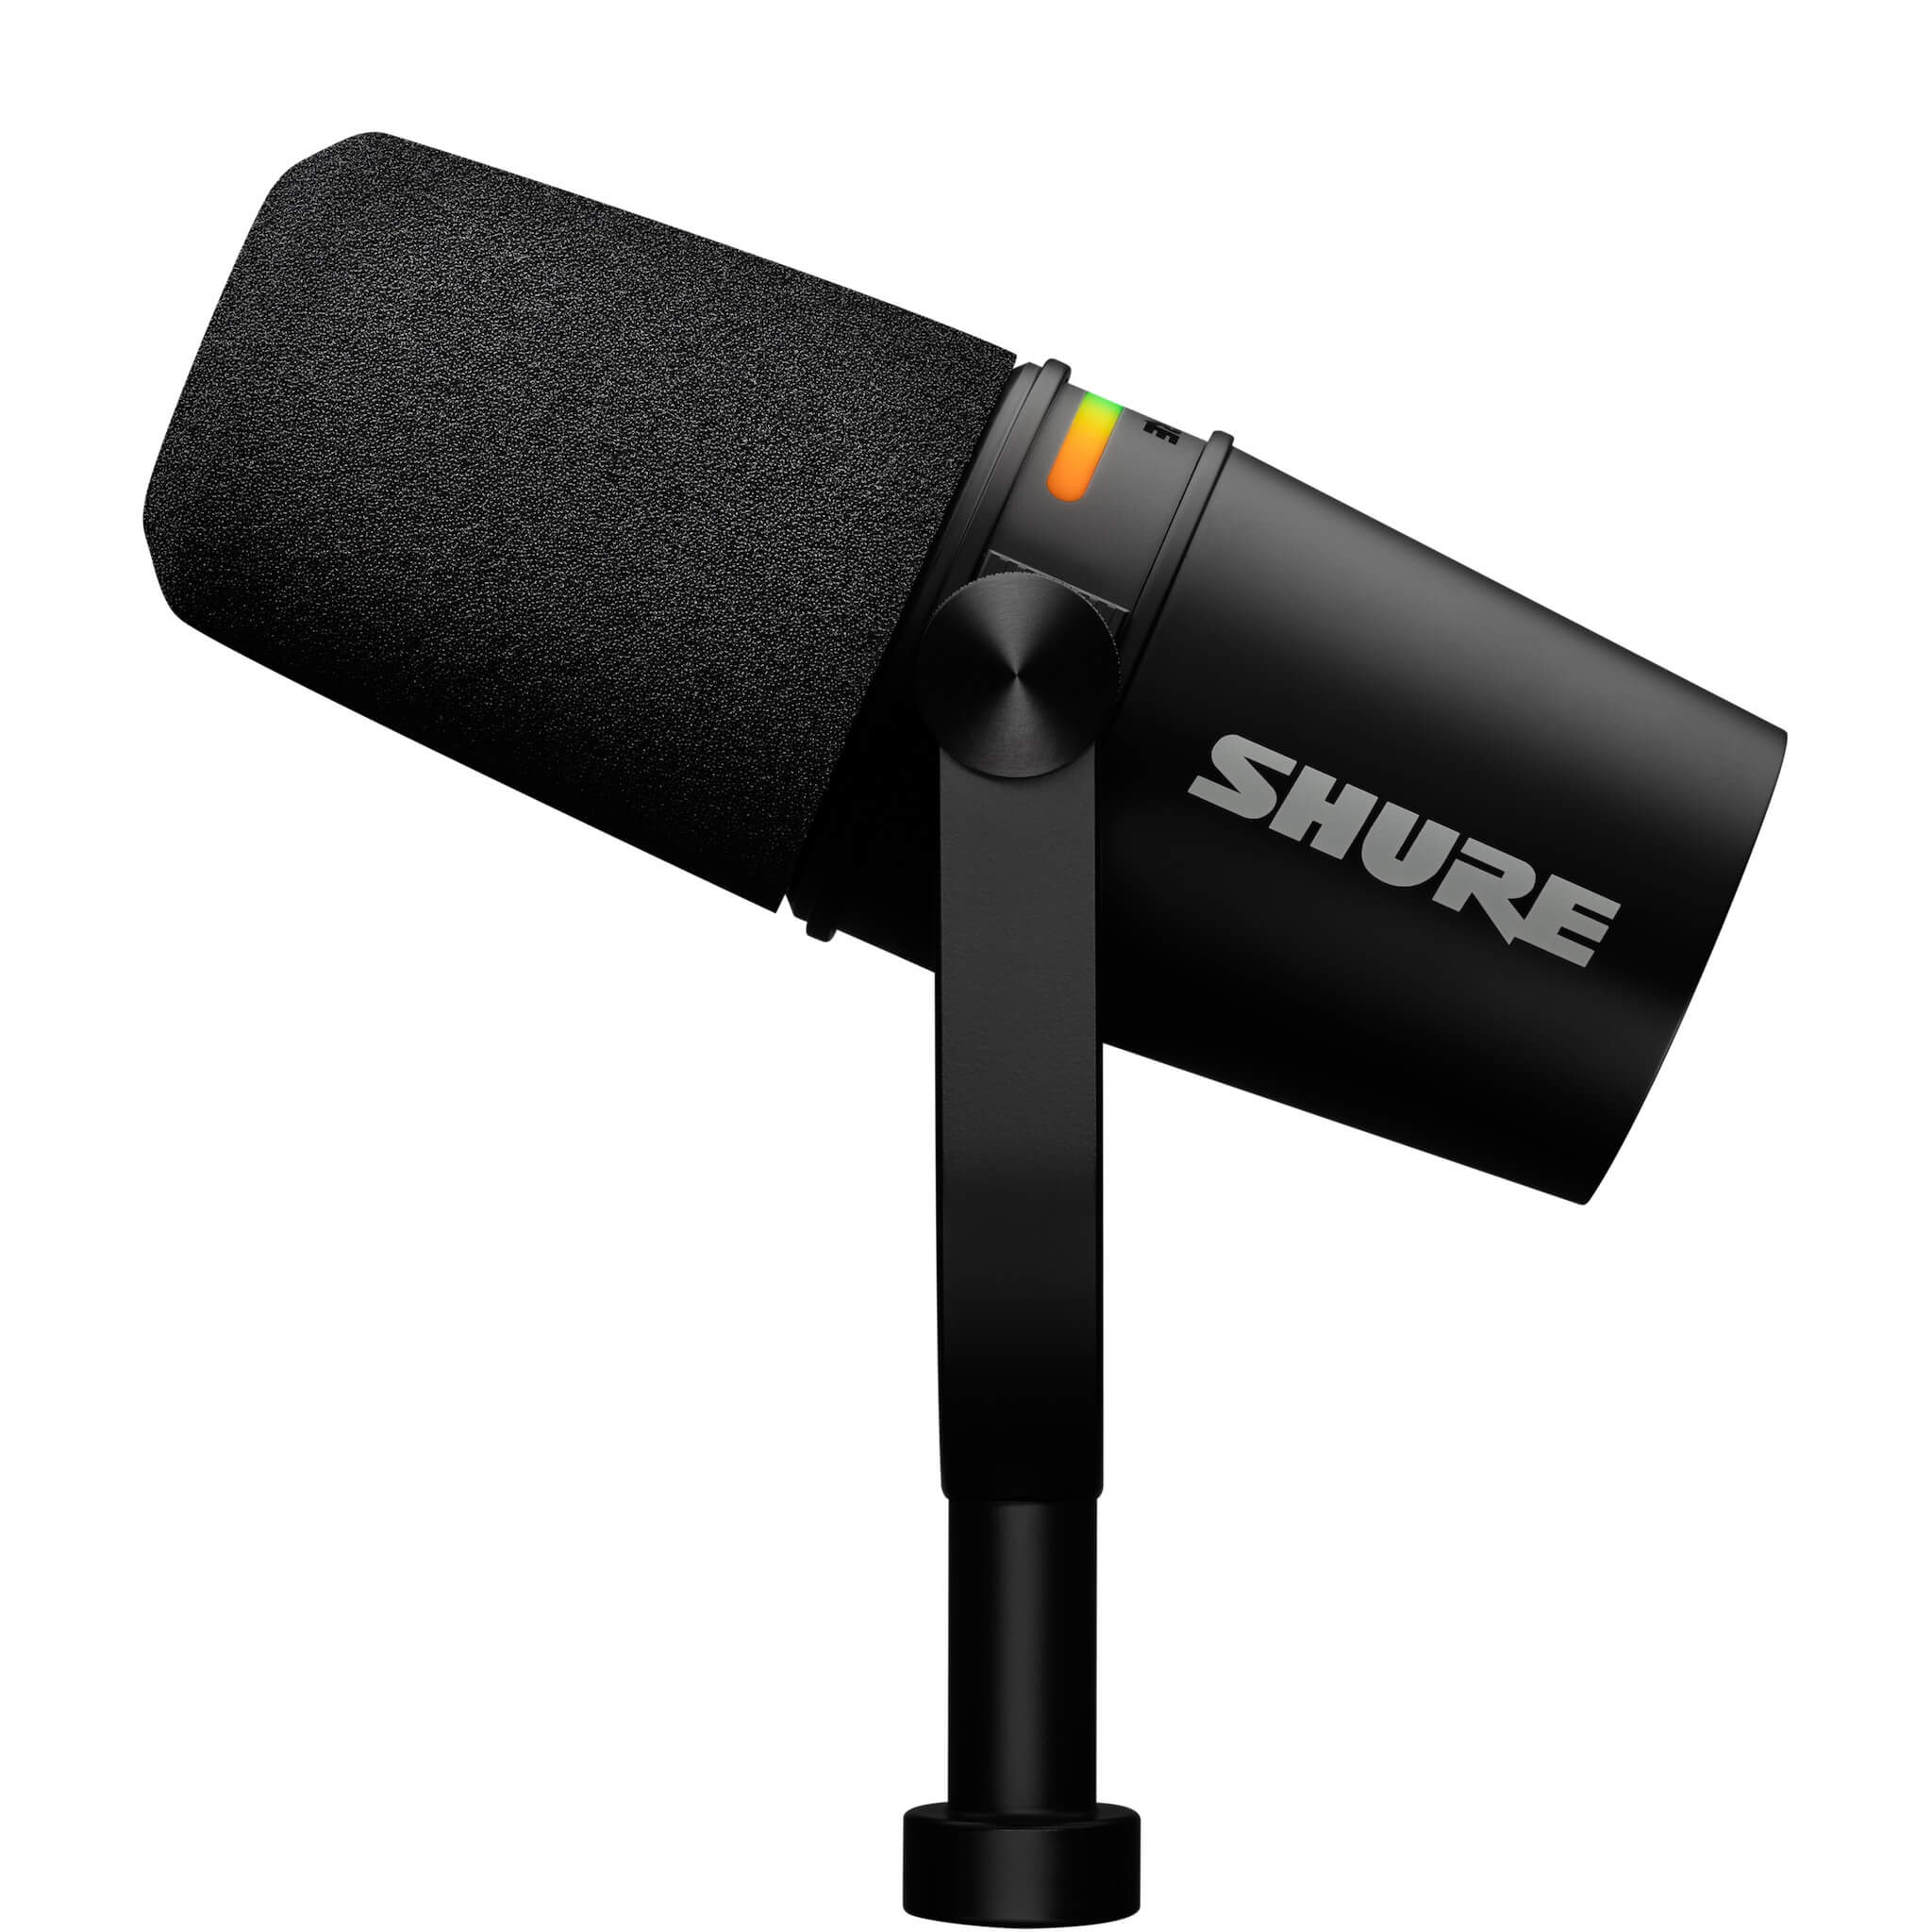 Shure MV7+-K - Podcast Microphone with USB and XLR Outputs, black side